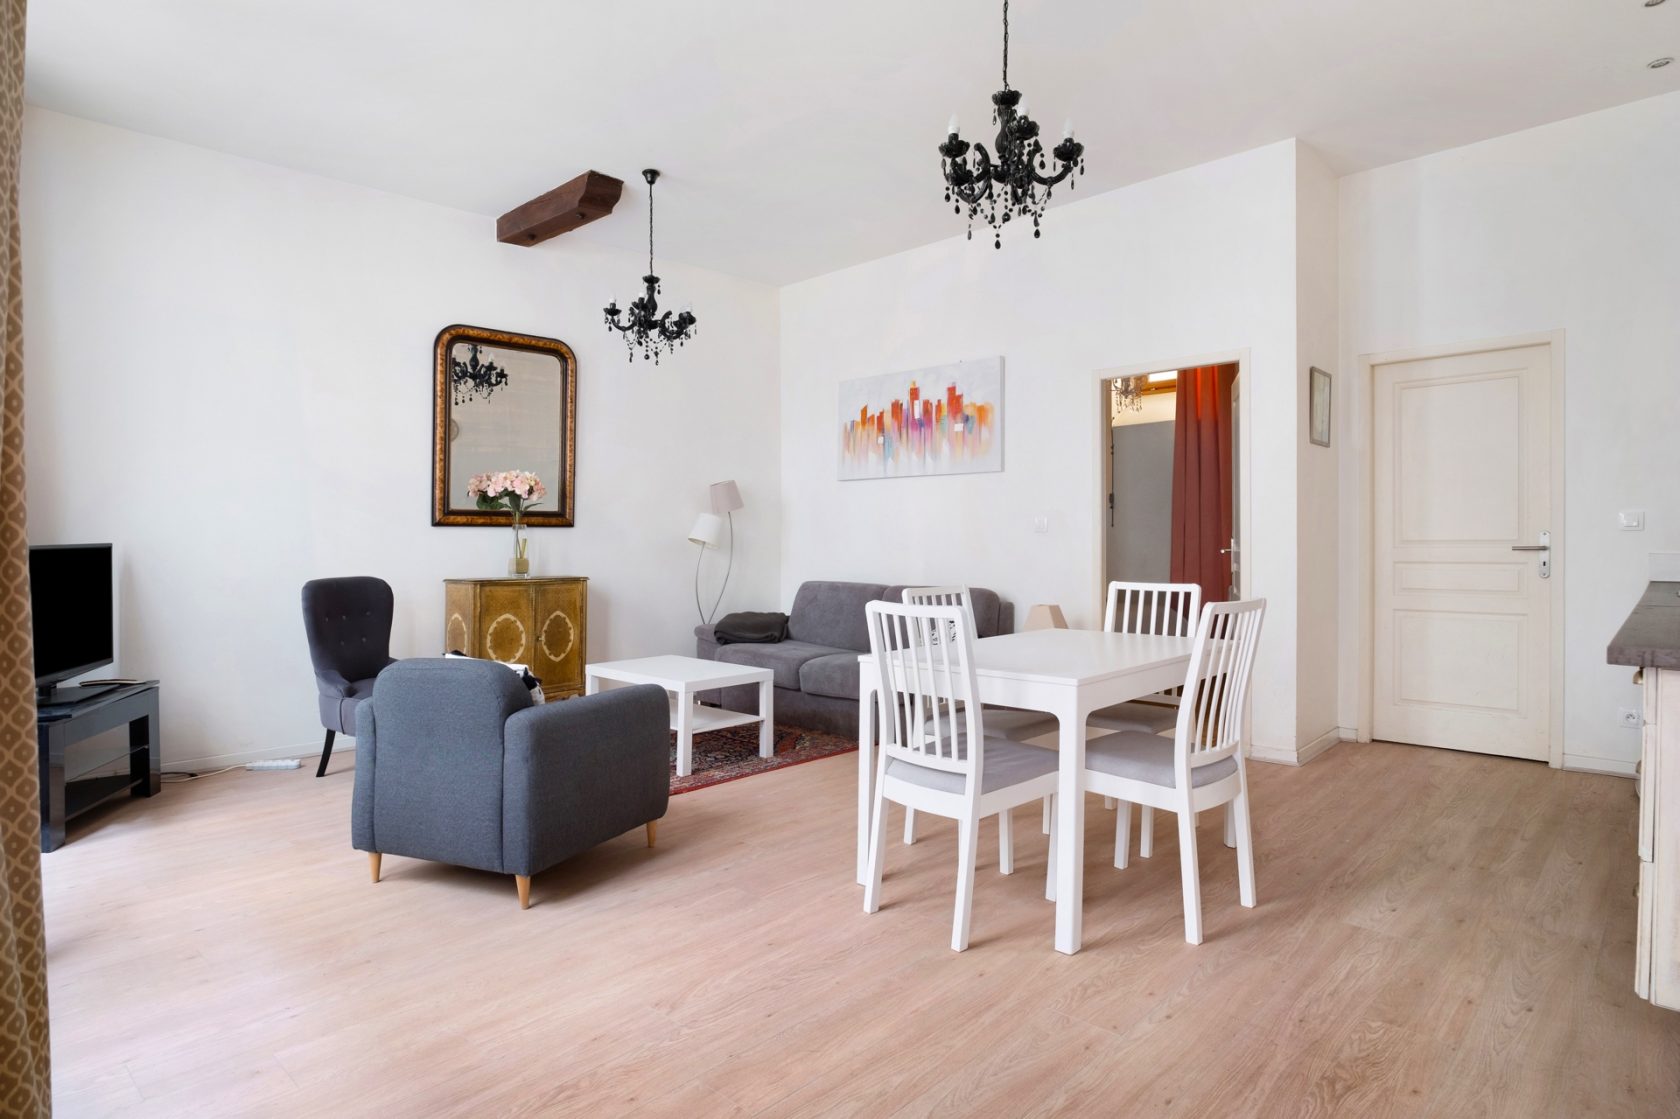 Renovated apartment in the heart of Old Lyon